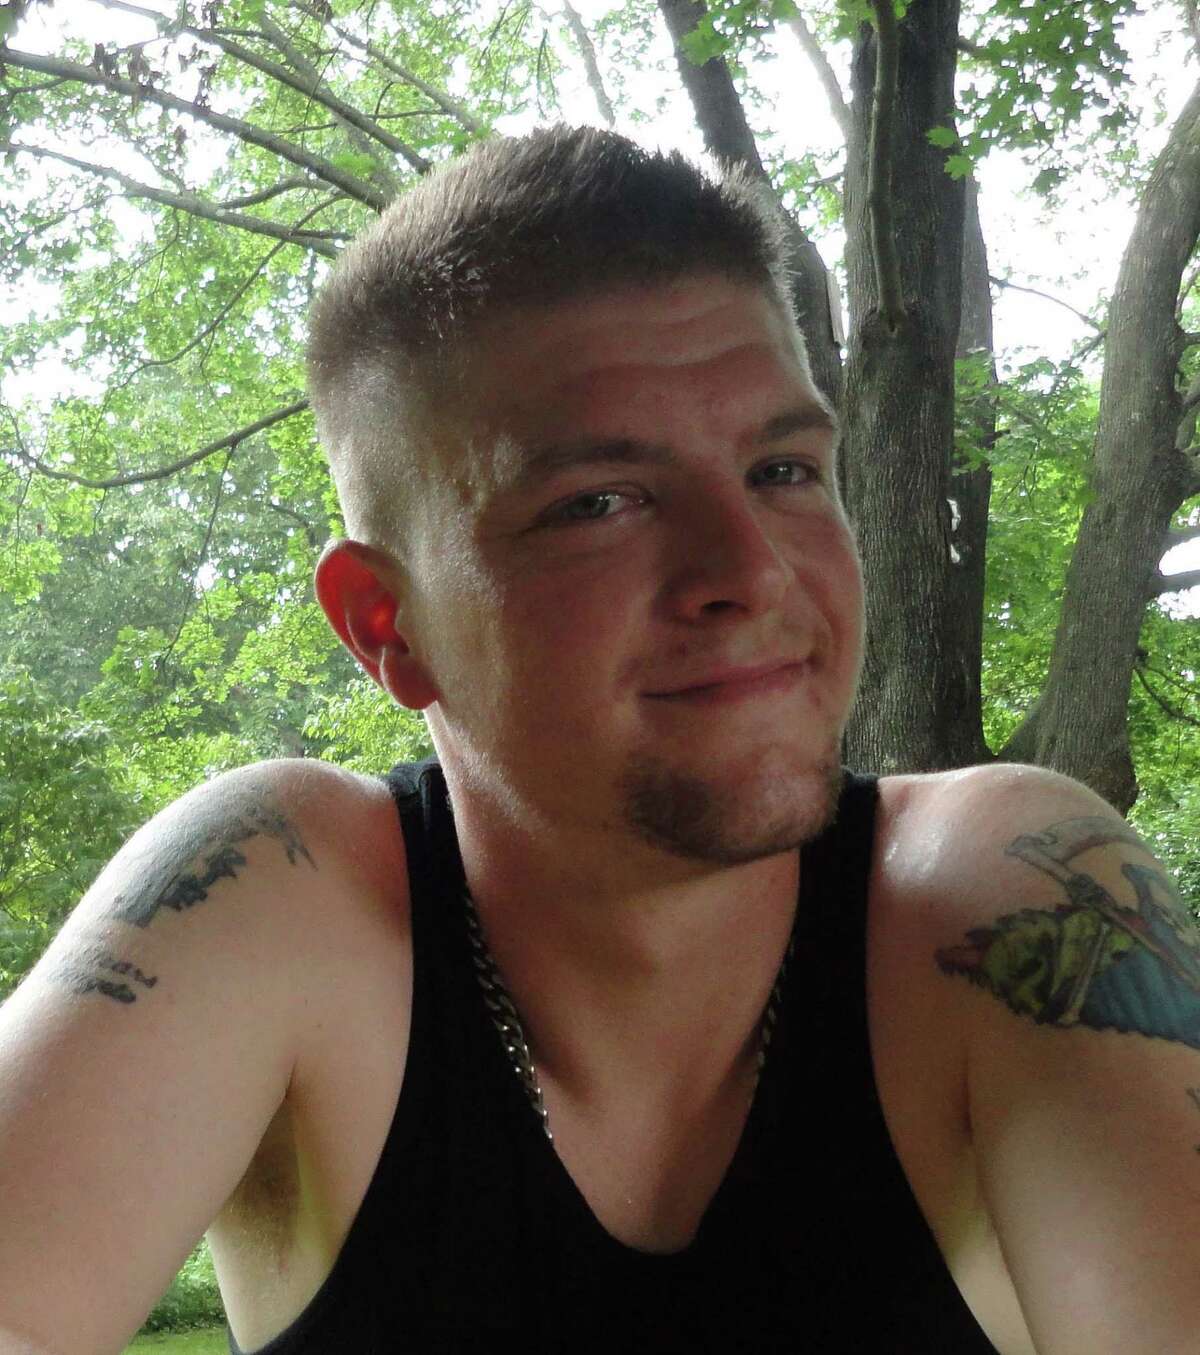 Jack Ian Few, 33, of West Haven, Conn., died peacefully on Wednesday, April 3, 2019. Services were held on Tuesday, April 9, 2019.